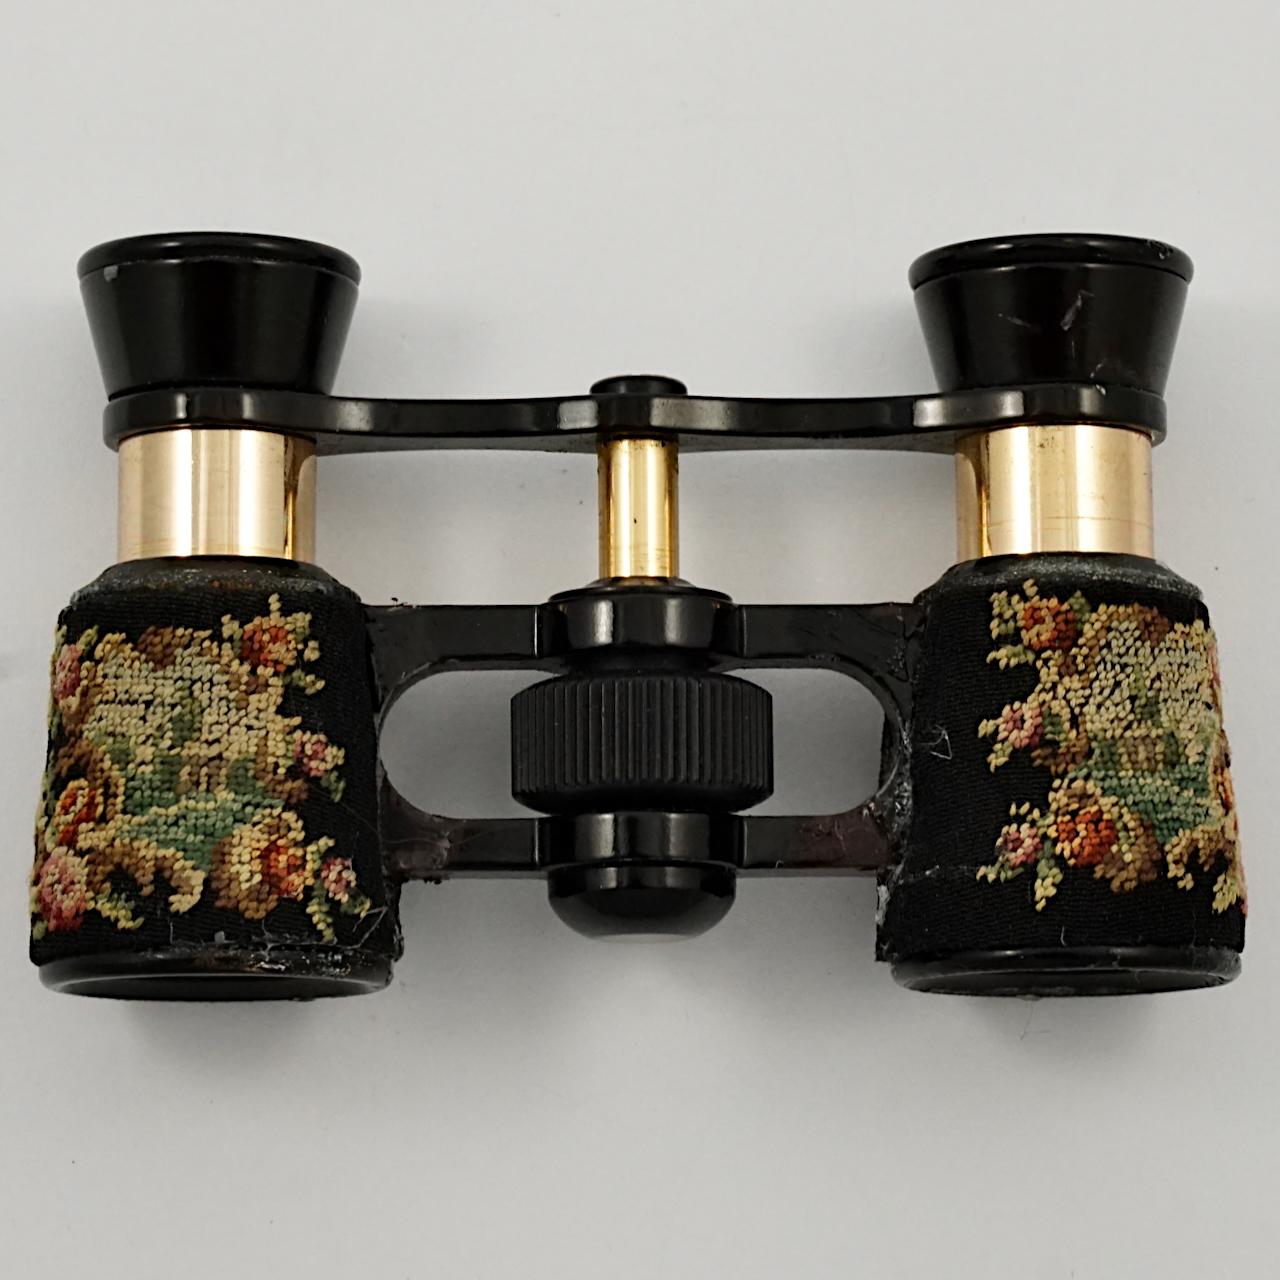 Brown Petit Point Opera Glasses in a Petit Point Case with Gold Leather Moiré Lining